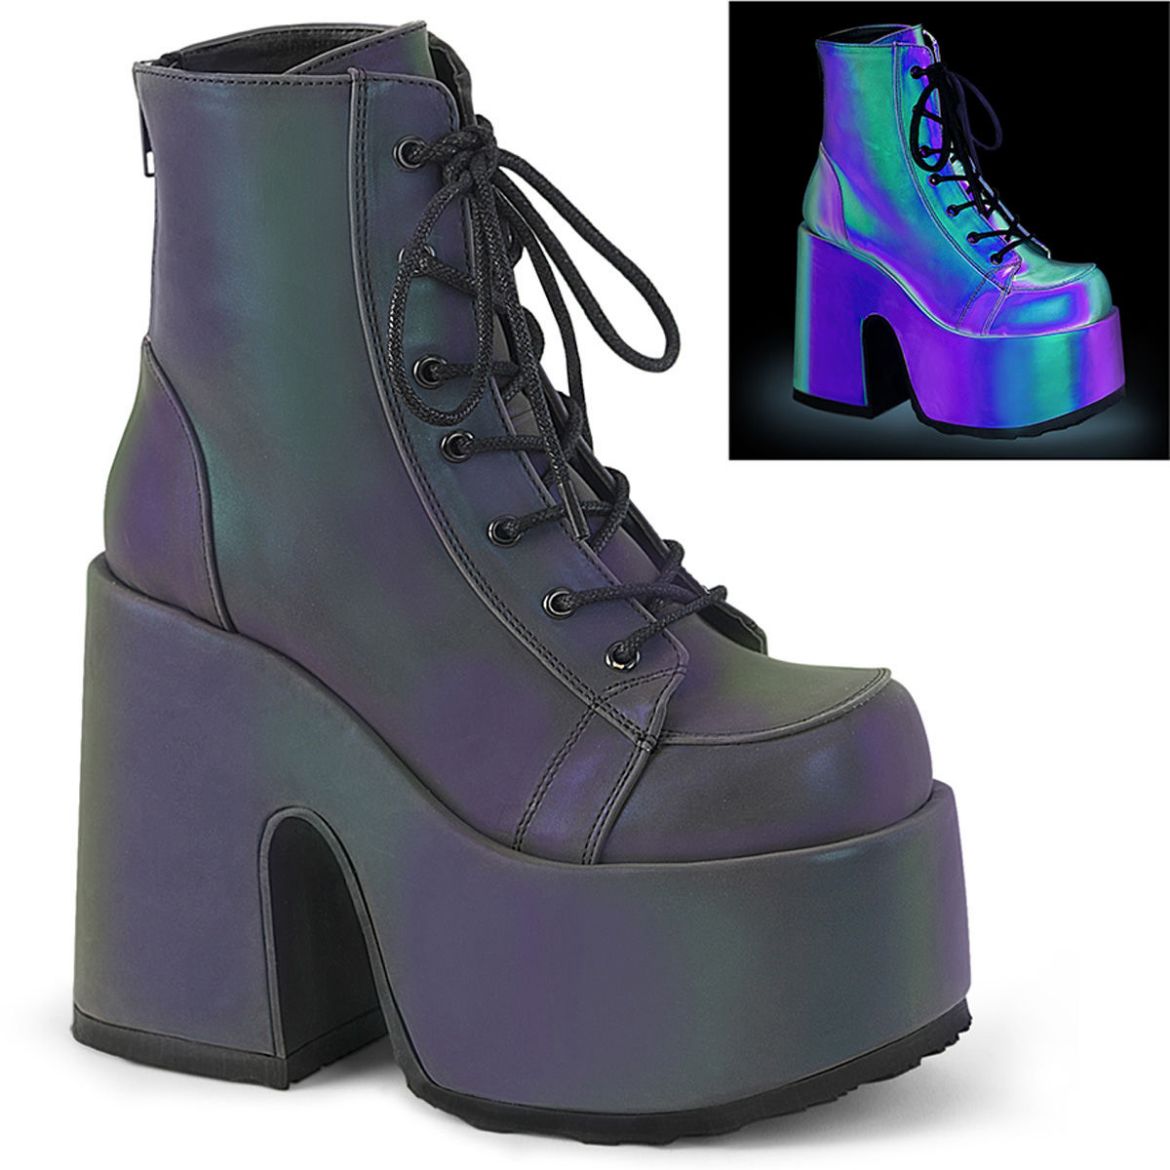 Image of Demonia CAMEL-203 Green Multi Reflective 3 1/2 Inch Chunky Heel 2 1/4 Inch PF Lace-Up Ankle BT Side Zip